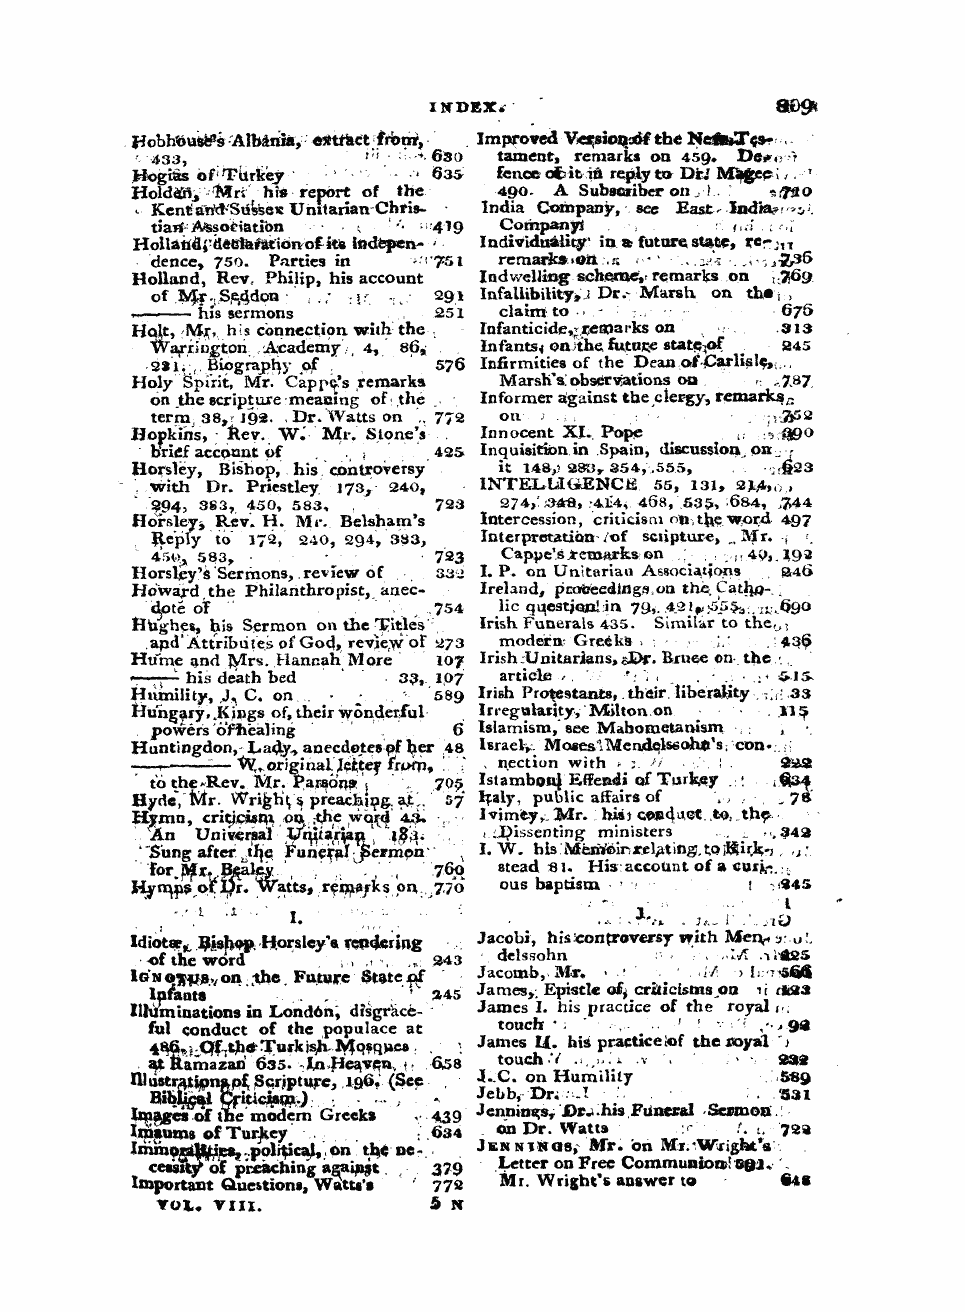 Monthly Repository (1806-1838) and Unitarian Chronicle (1832-1833): F Y, 1st edition, End matter: 11